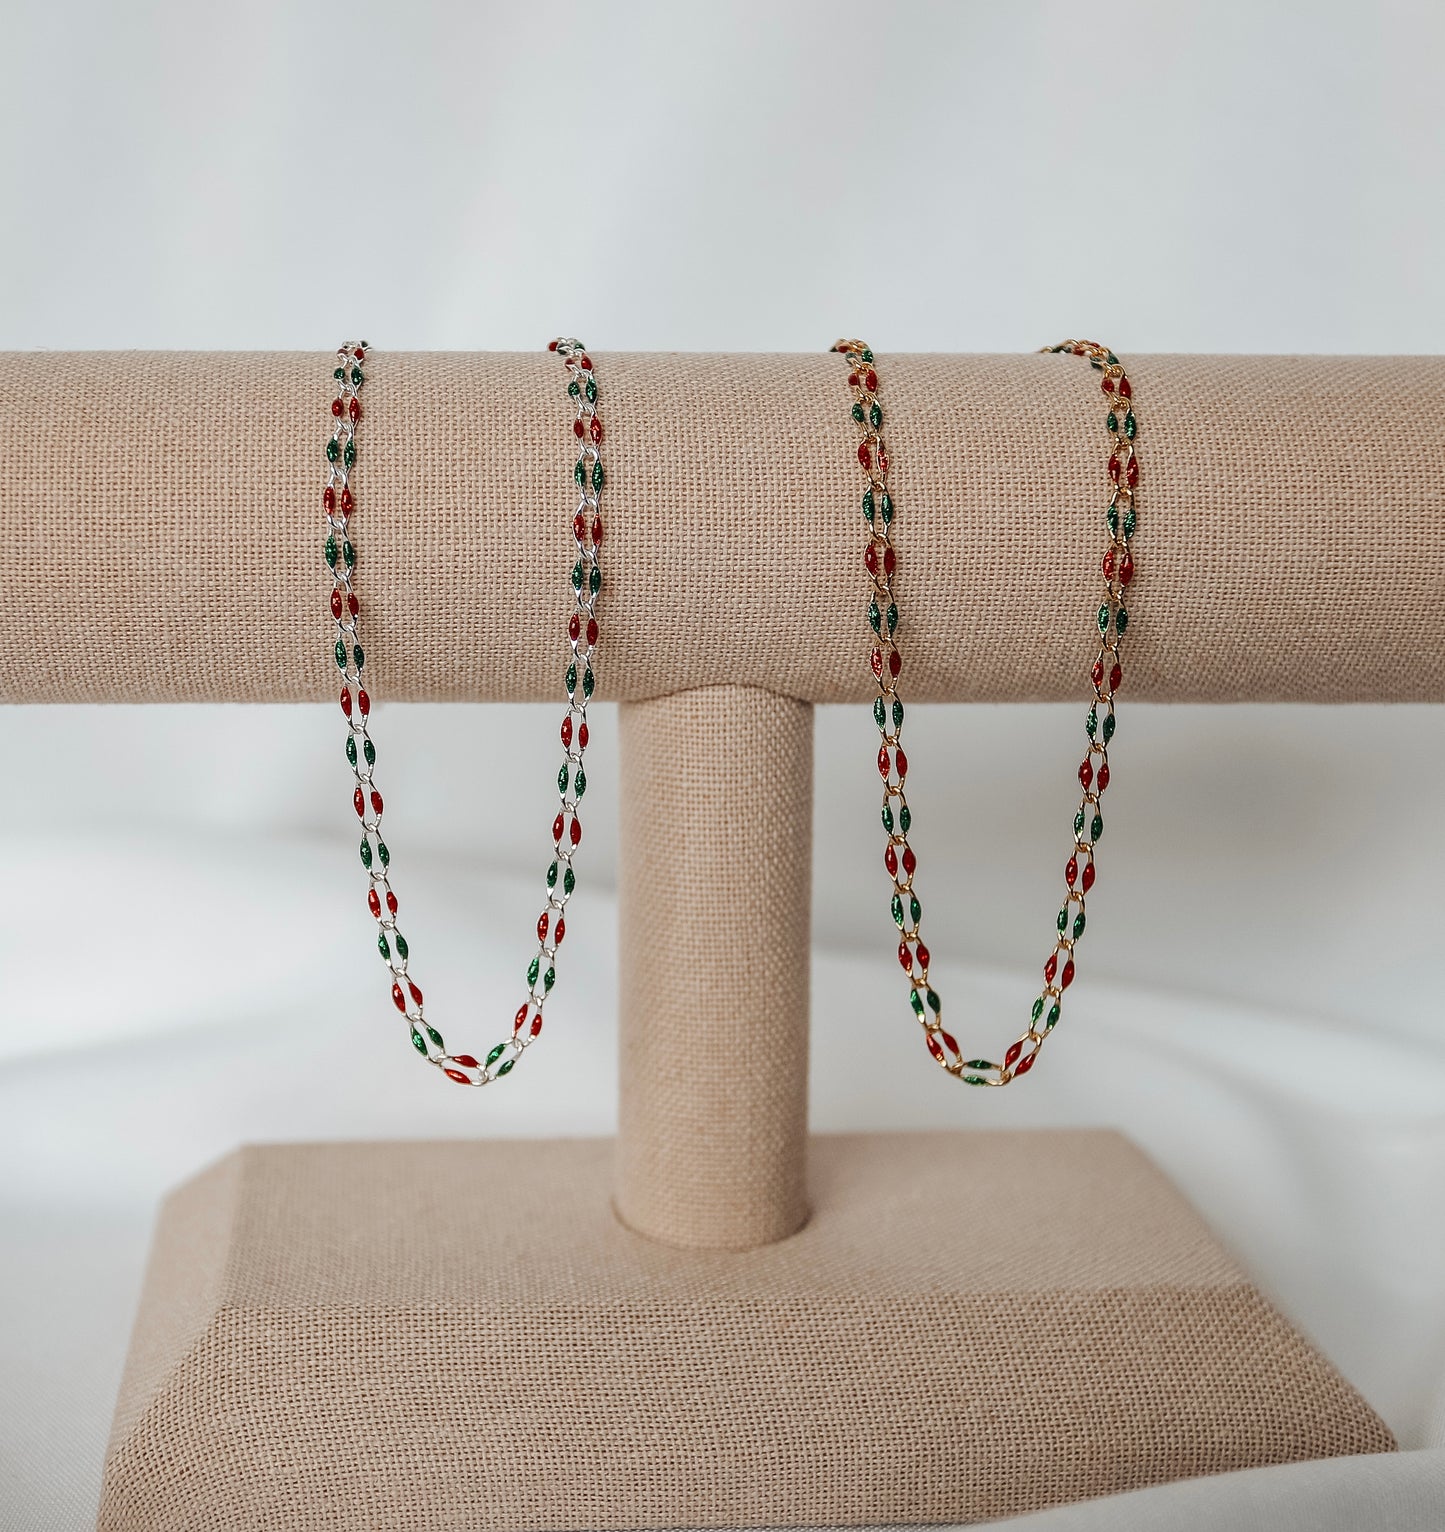 Plated Enamel Chain - Merry & Bright